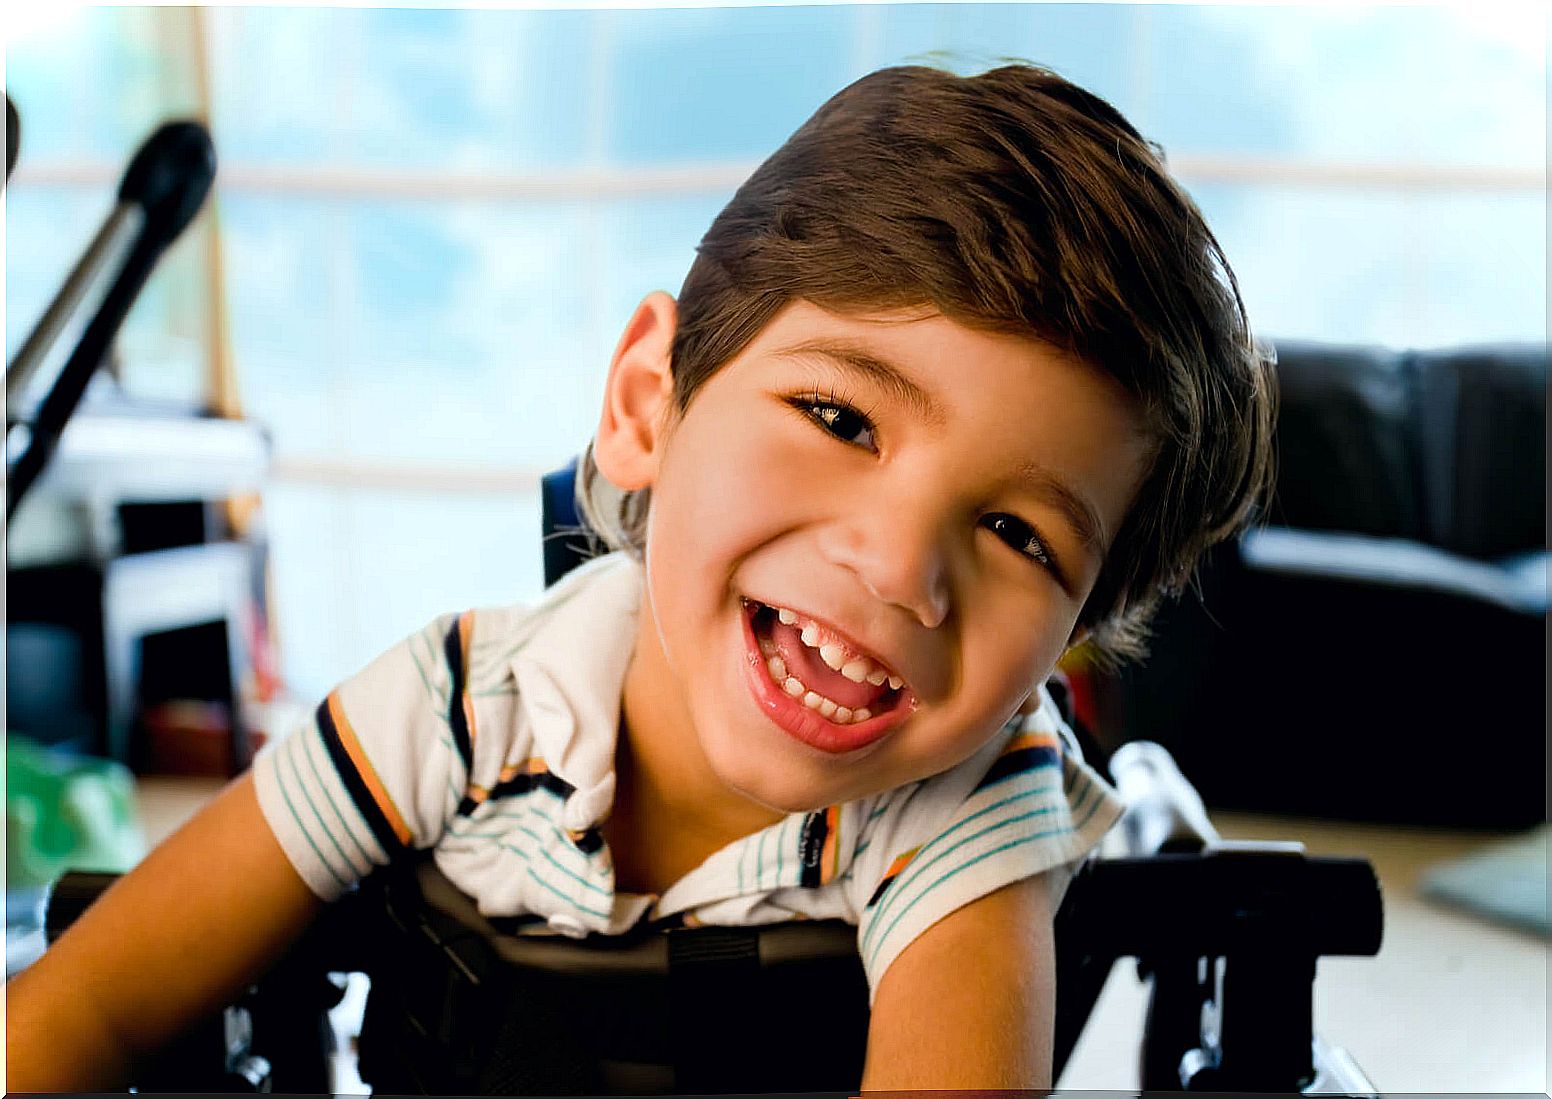 The importance of empowering children with disabilities